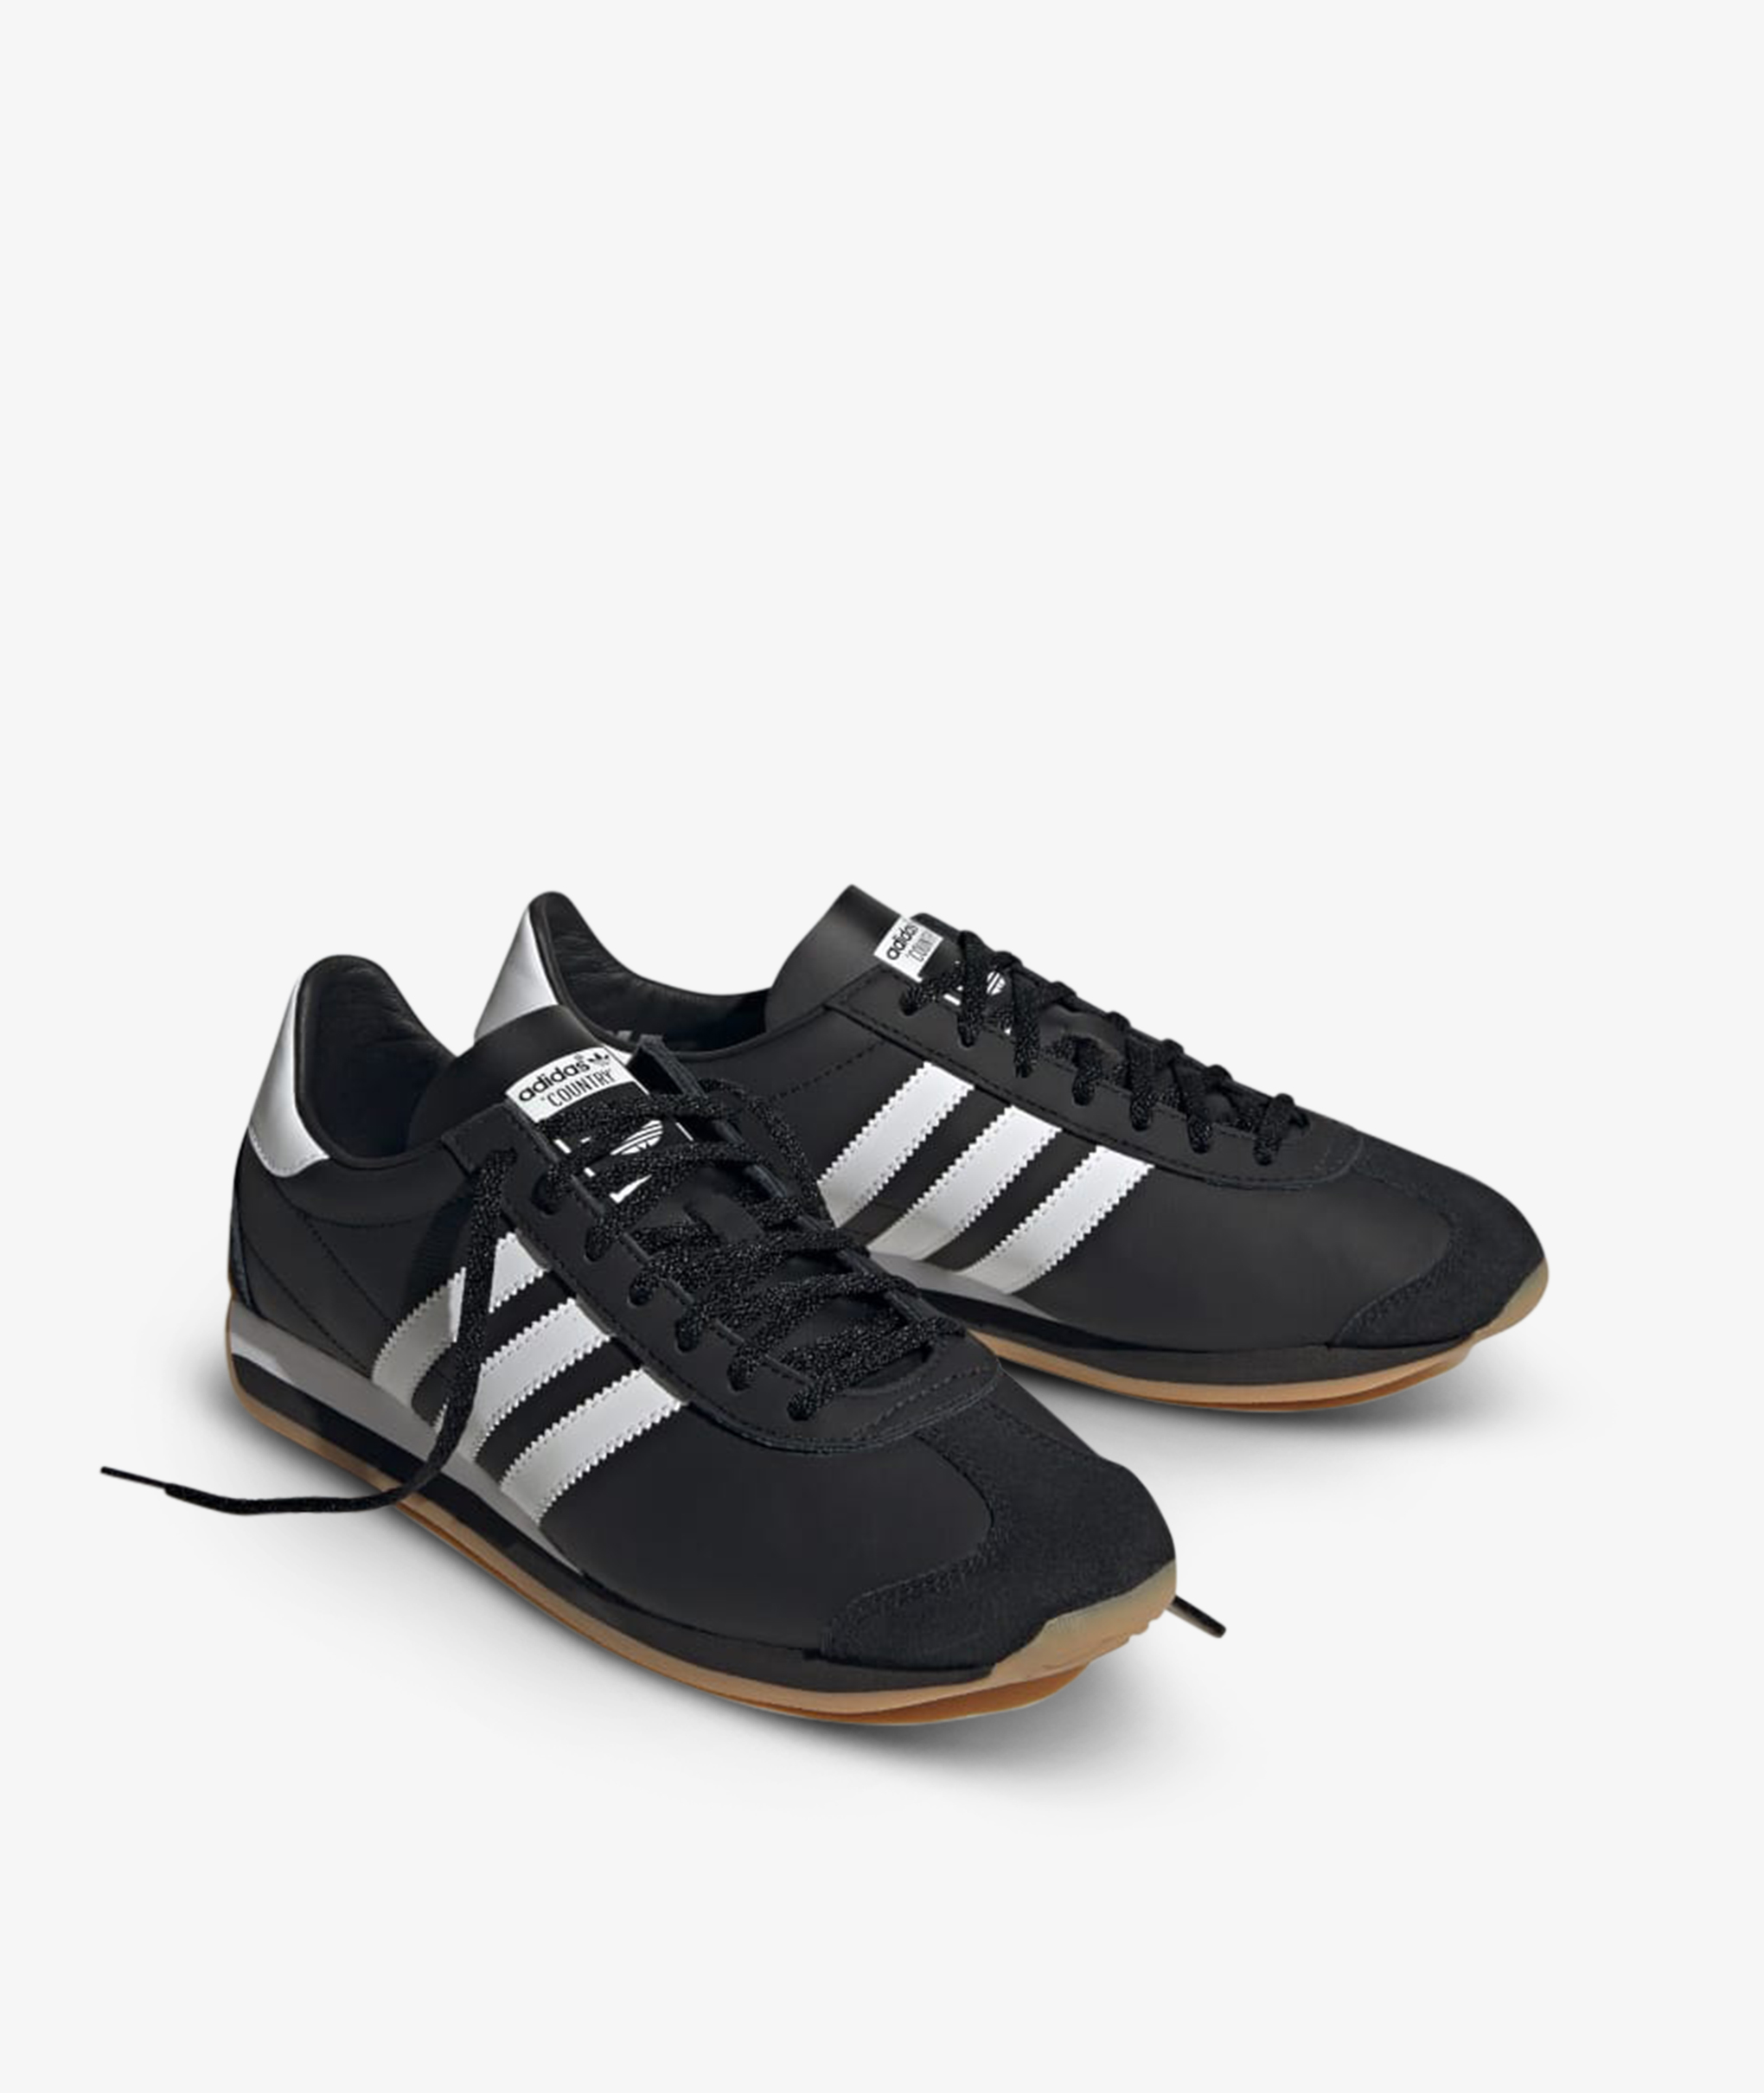 Norse Store | Shipping Worldwide - adidas Originals COUNTRY -